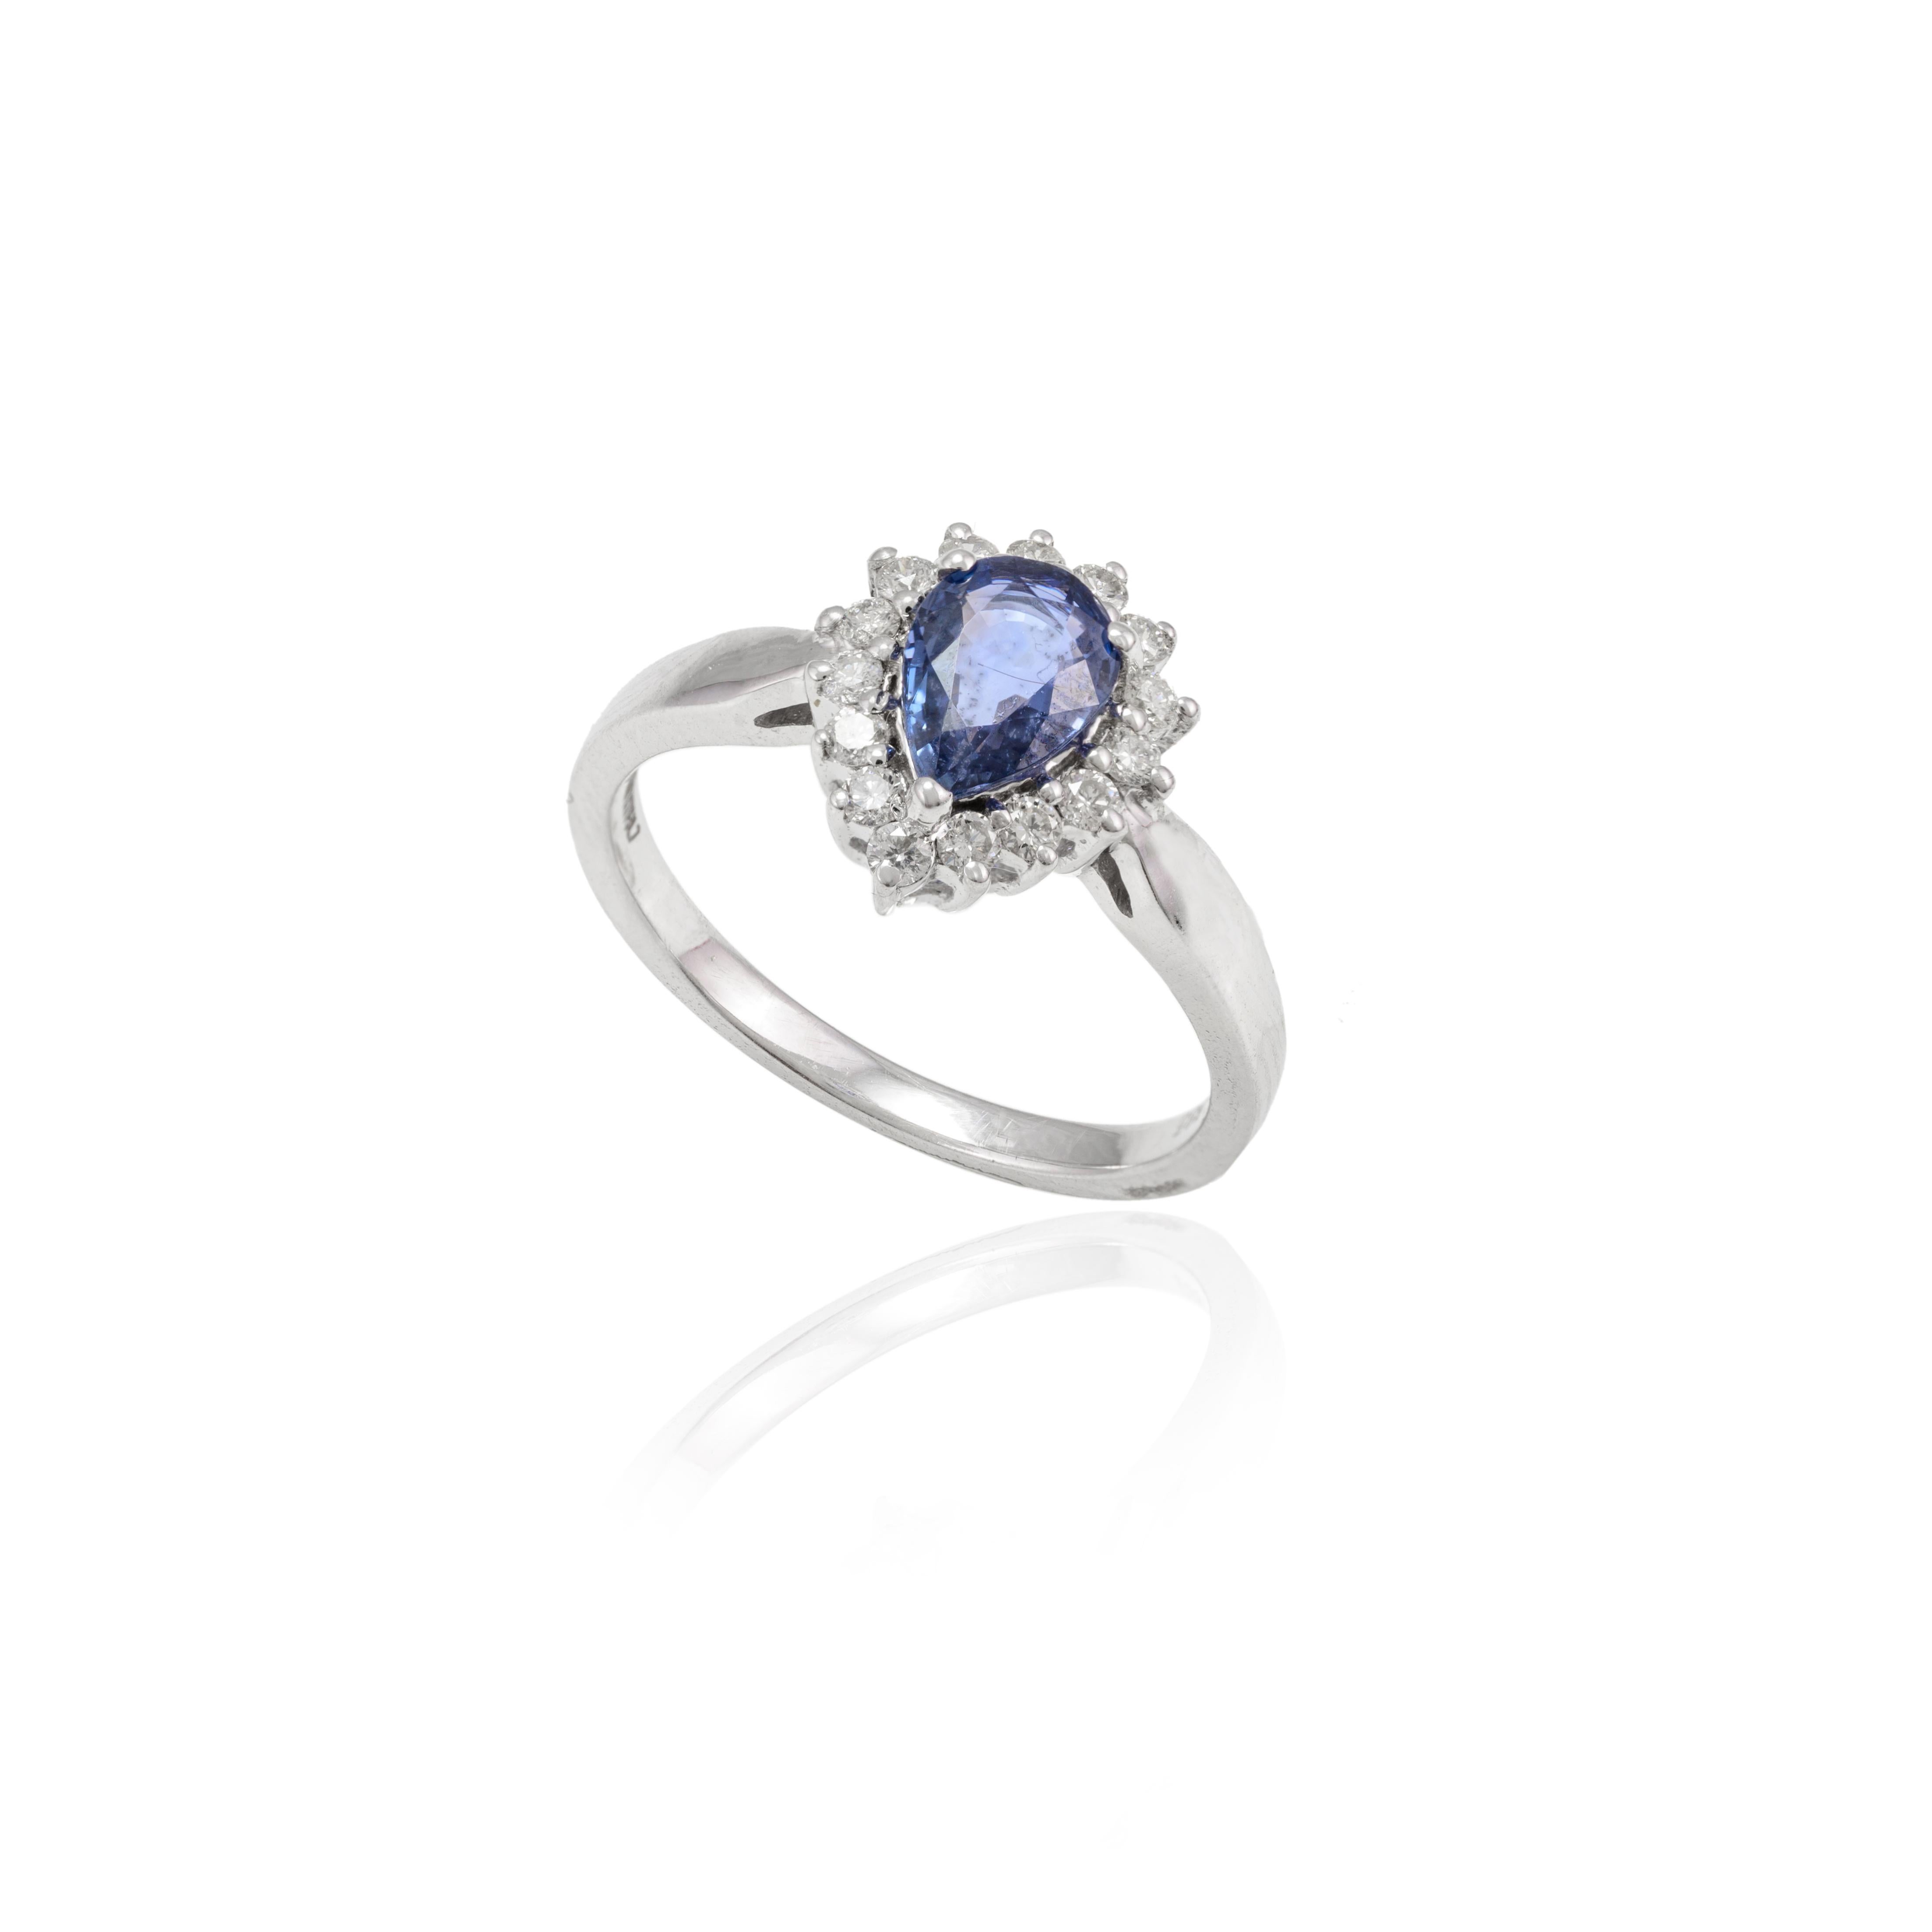 For Sale:  0.77 Carat Pear Cut Blue Sapphire and Diamond Halo Ring 14k Solid White Gold 4